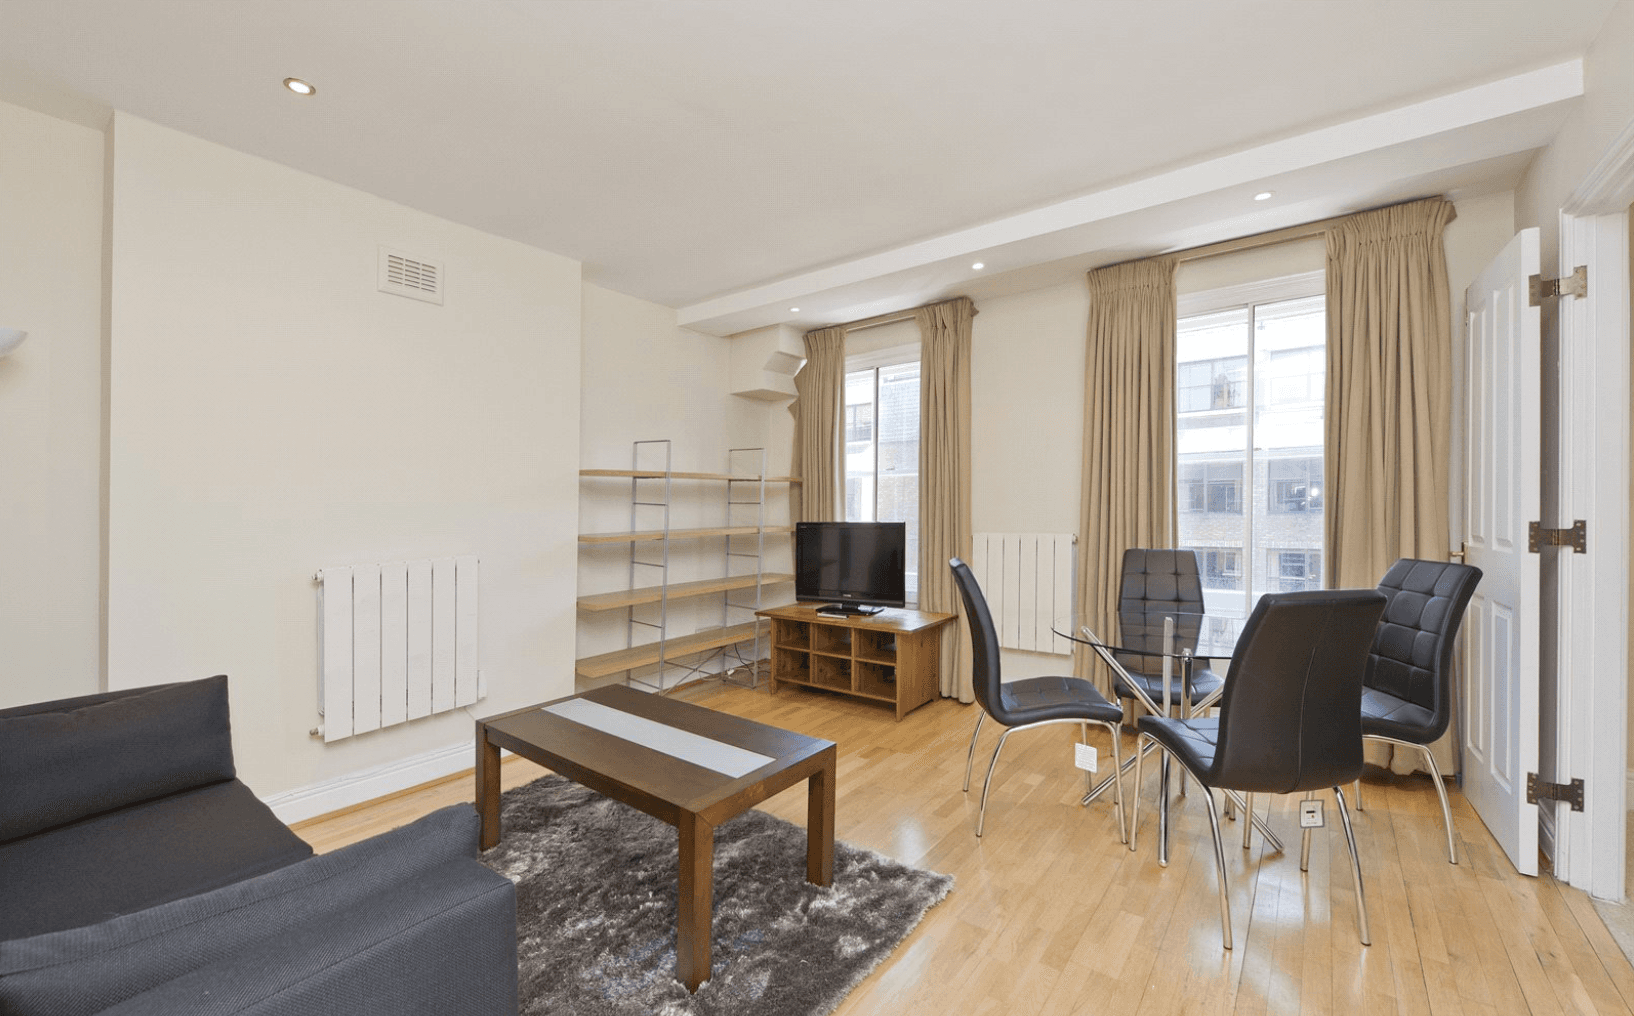 2 bedroom apartment for rent in Marylebone, W1H